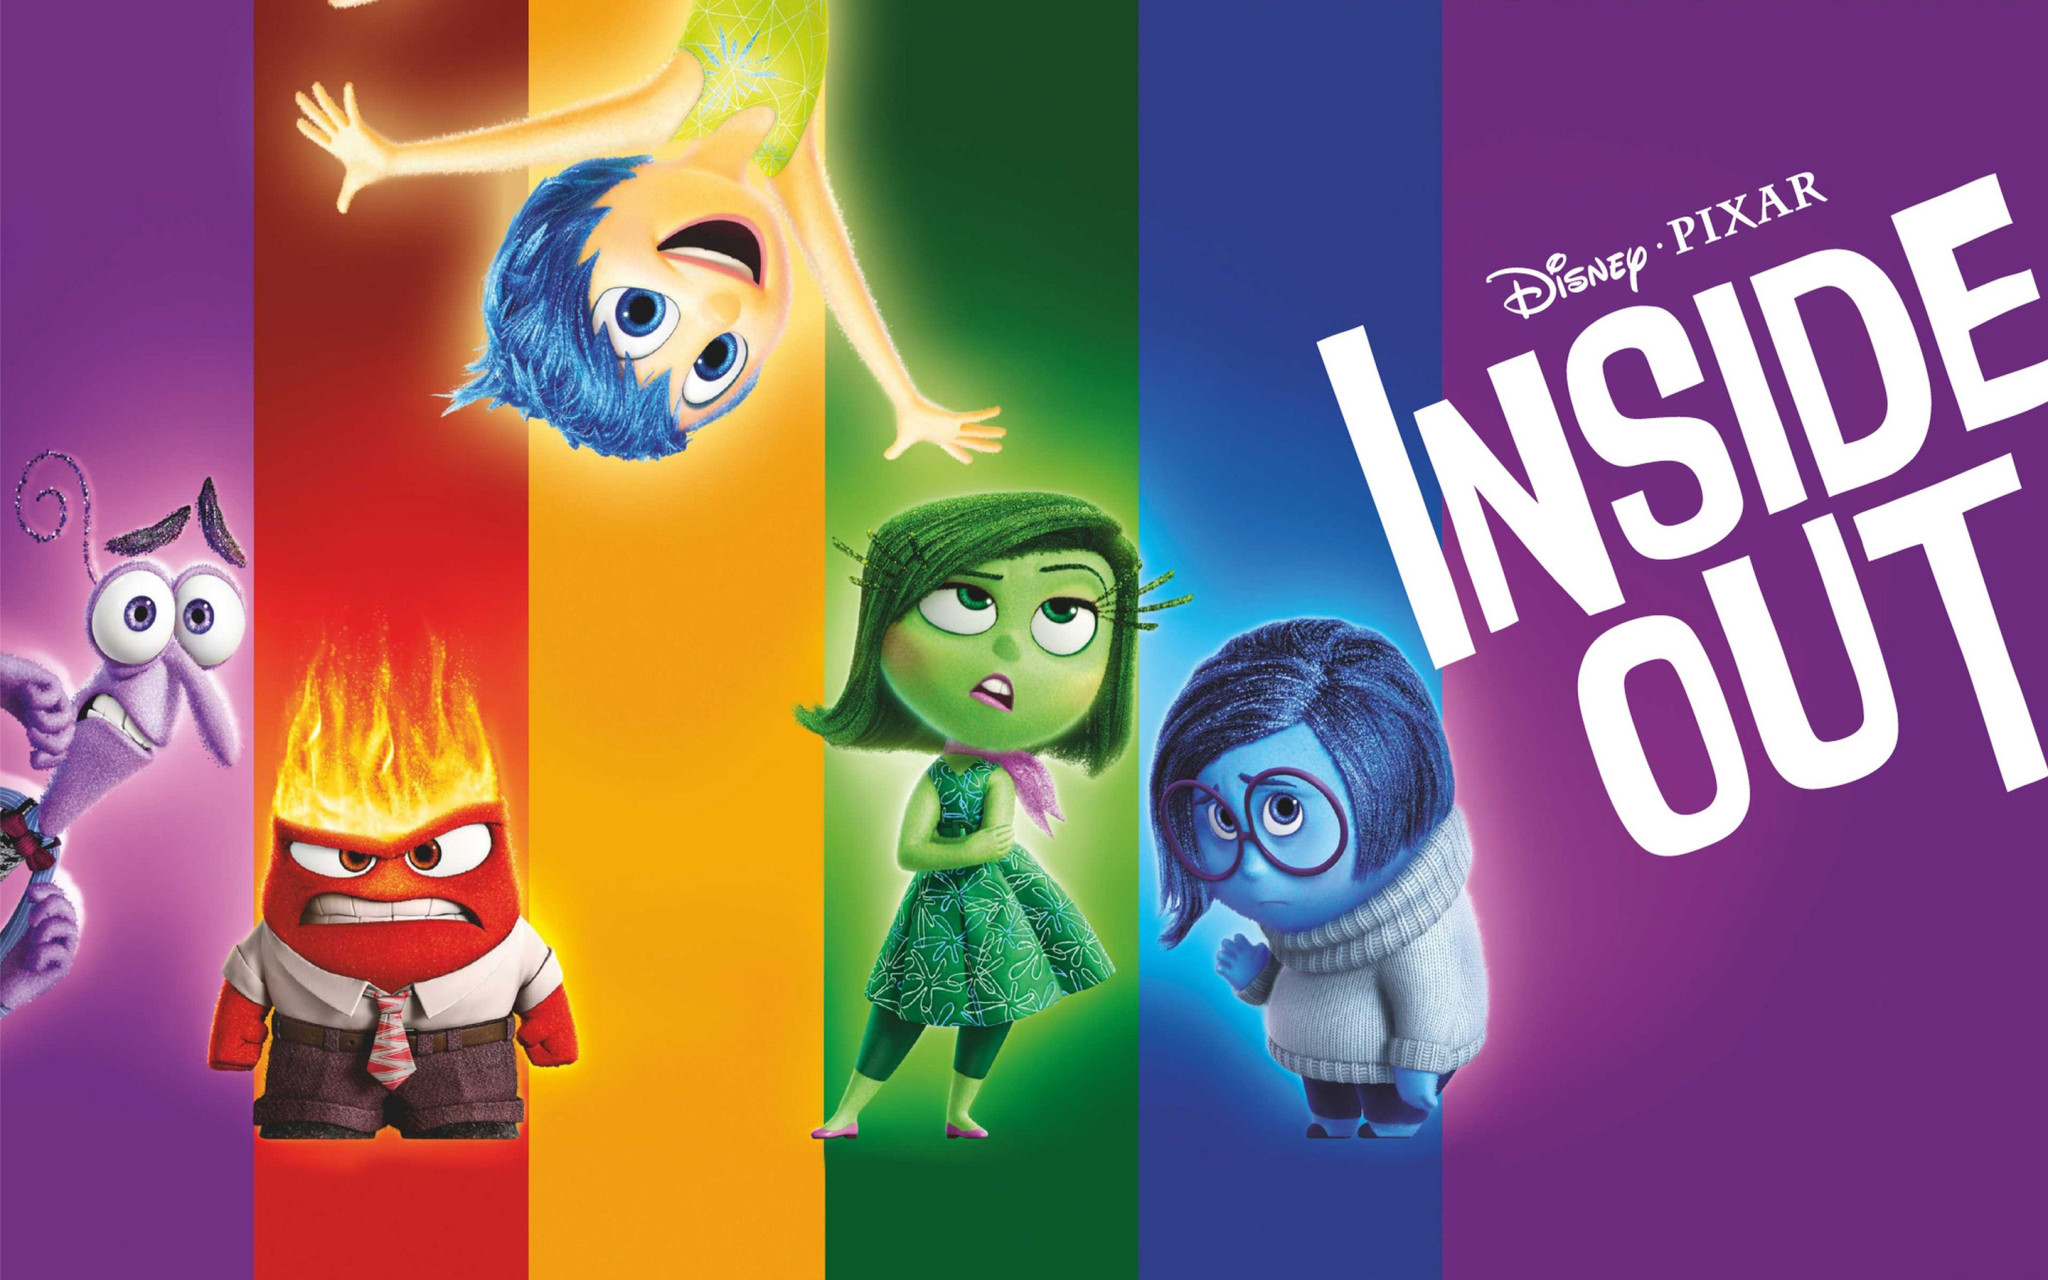 Host Your Own “Inside Out” Movie Night!